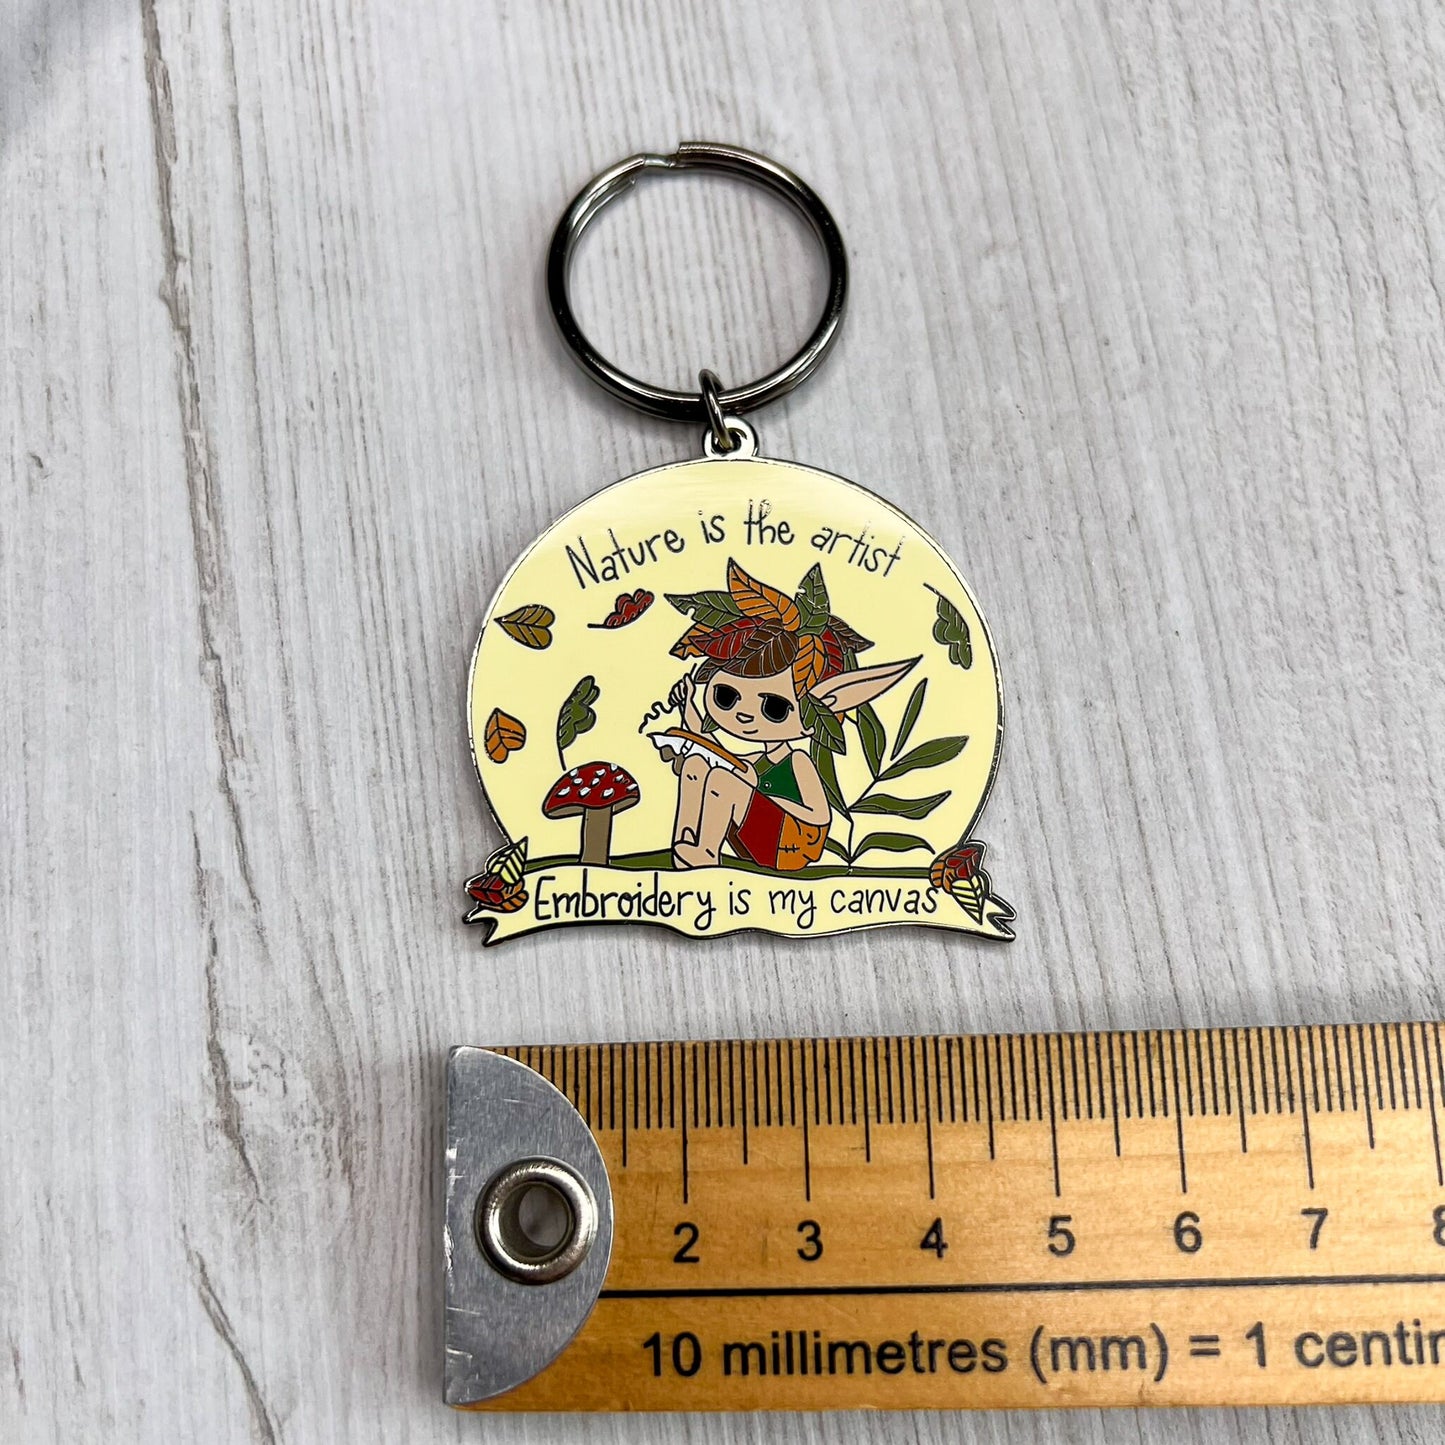 Embroidery themed keyring